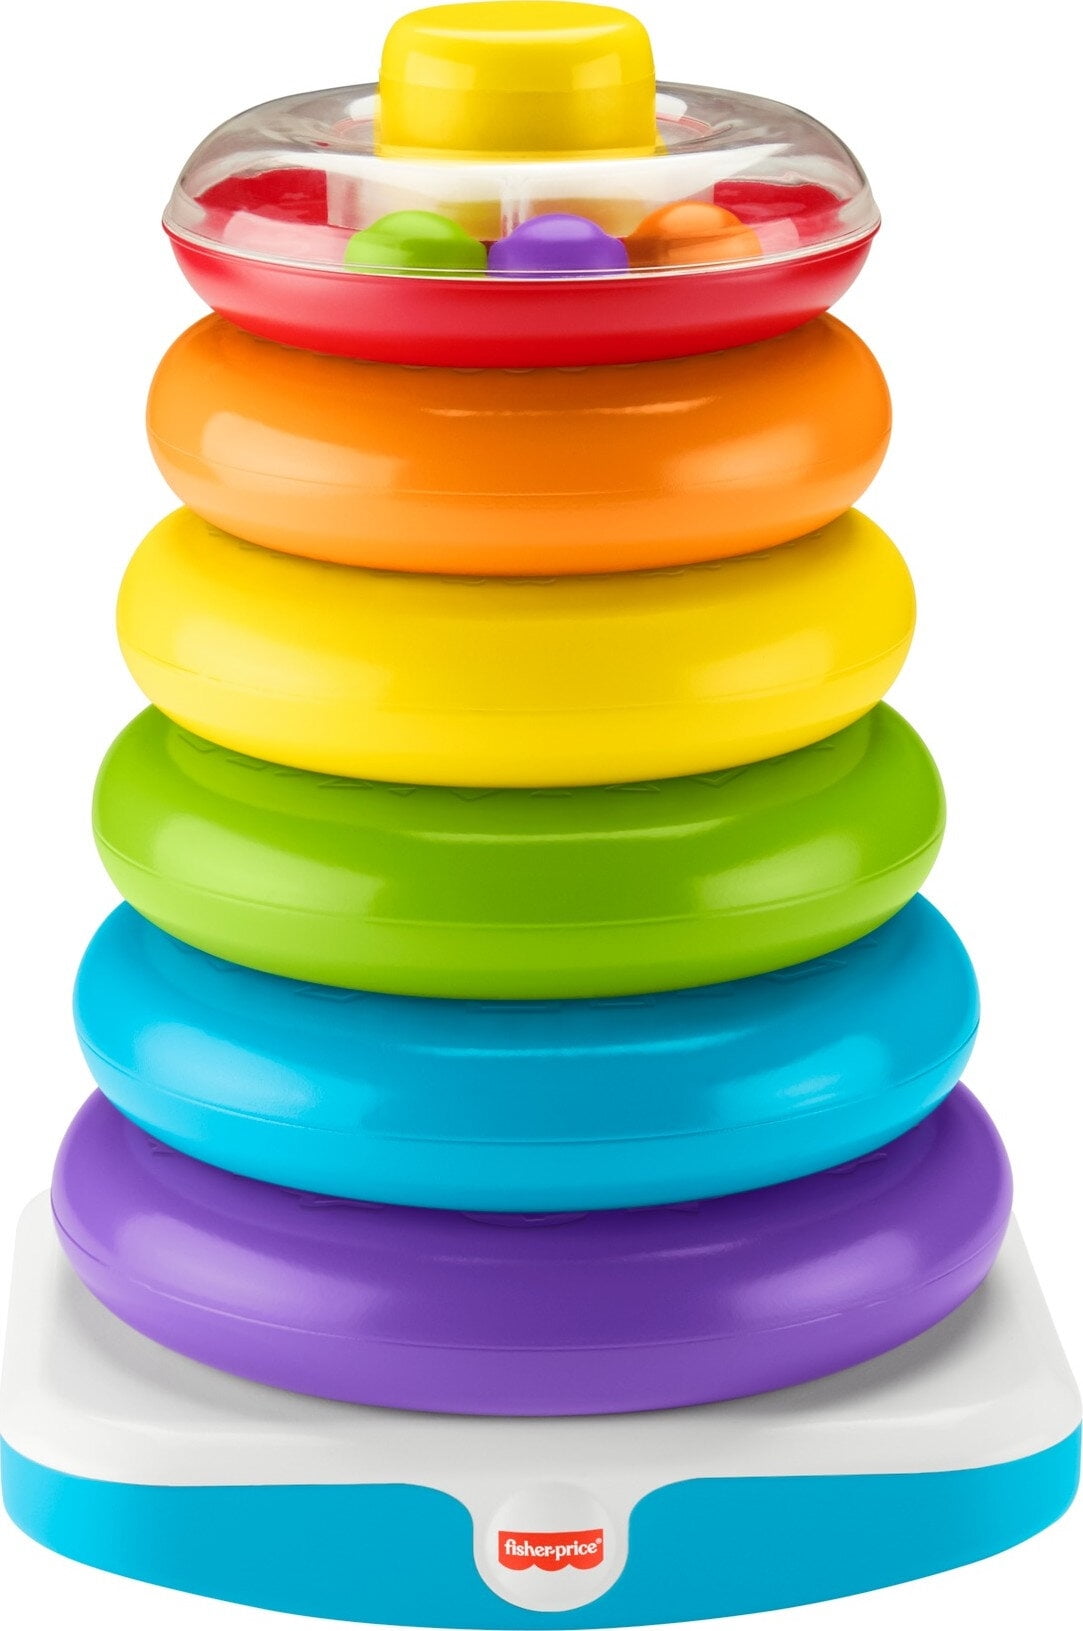 Fisher-Price Giant Rock-a-Stack Multicolour Rings for Toddlers/Babies 